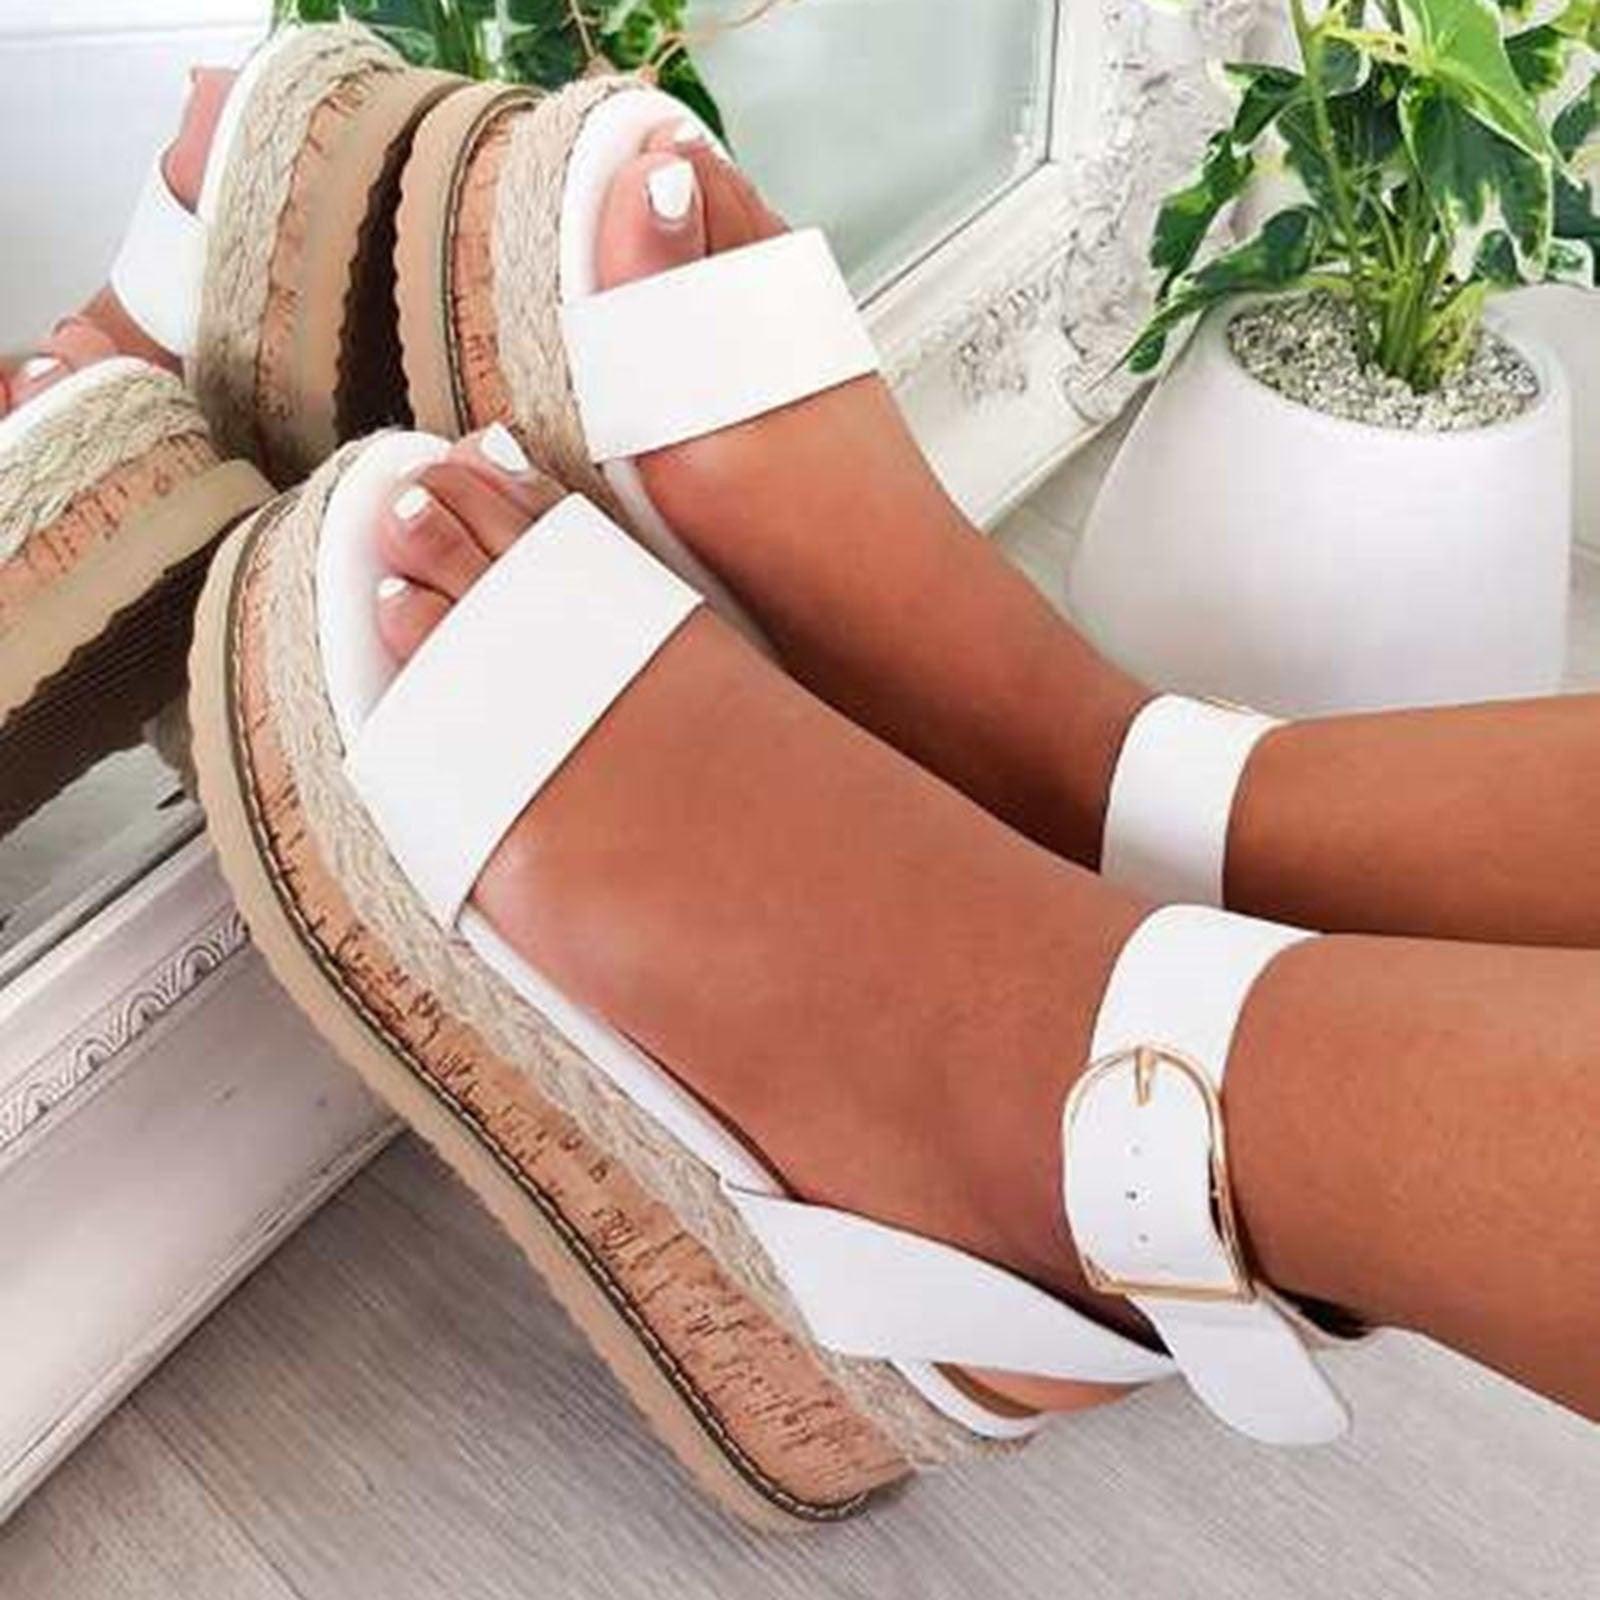 Sandals Women's Summer Shoes Breathable buckle Thick-soled Platform Wedges Slip-on Casual Roman Female Sandals